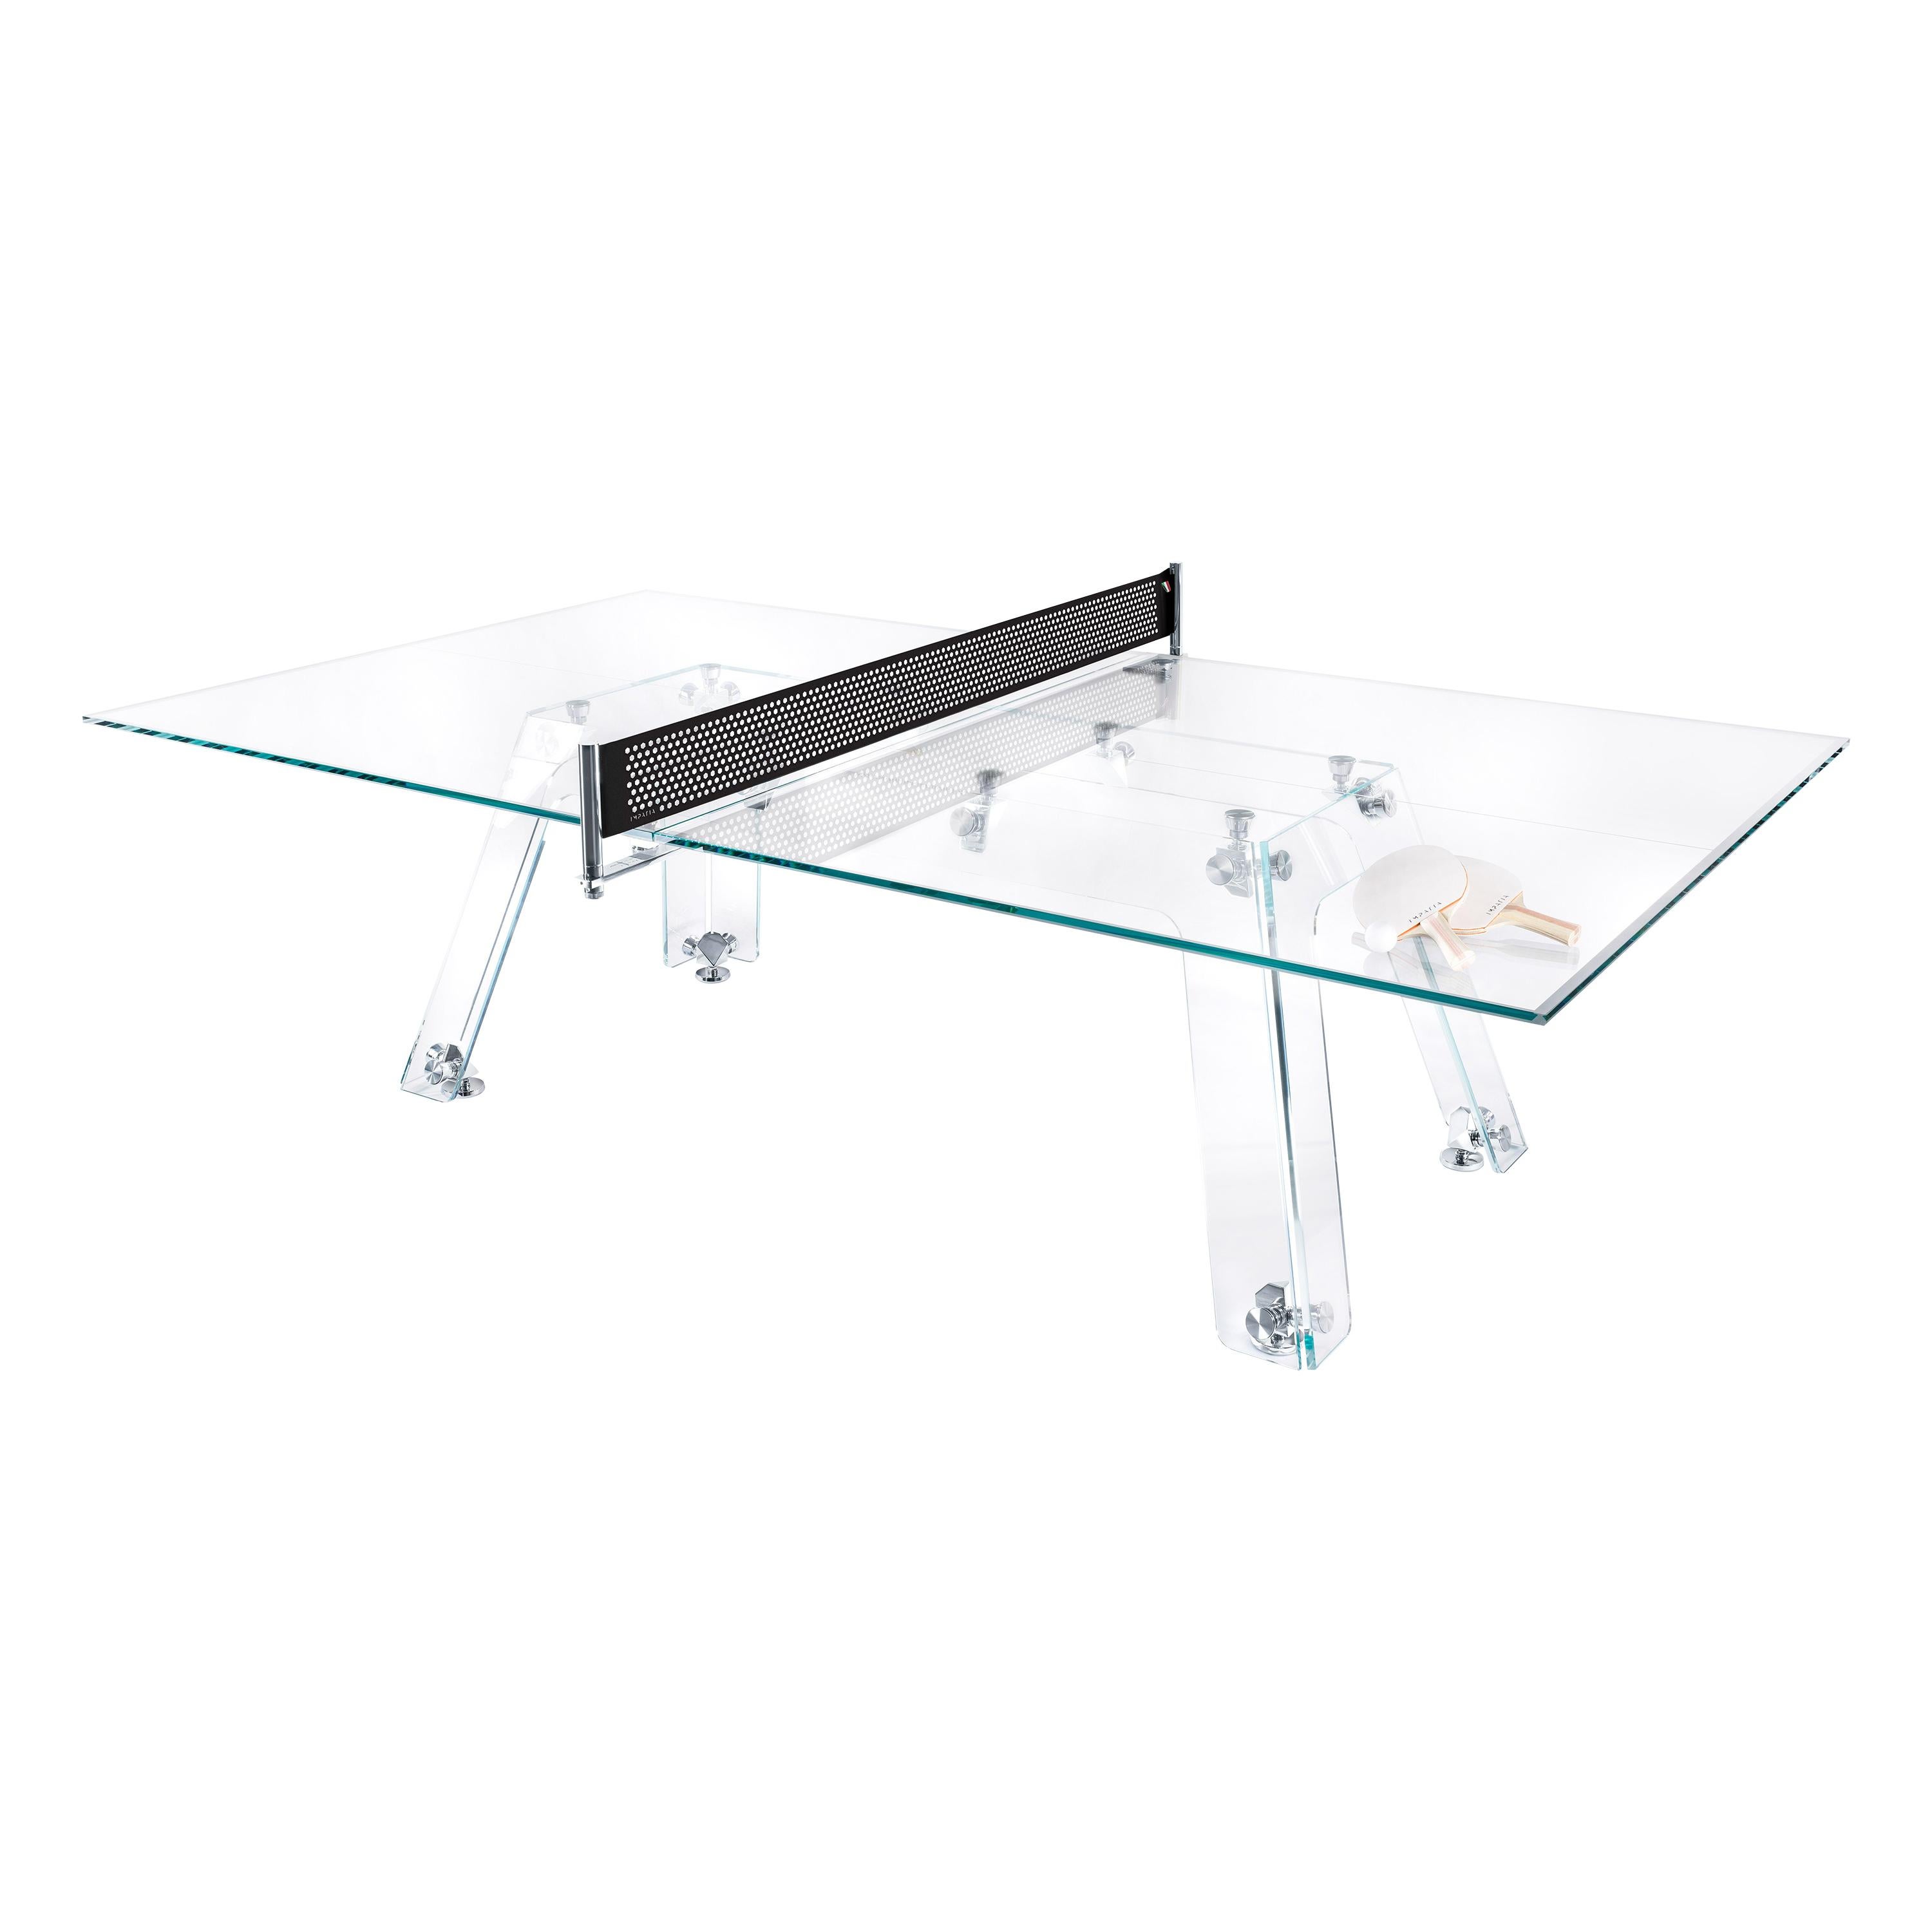 Lungolinea Chrome Edition Glass Ping Pong Table by Impatia